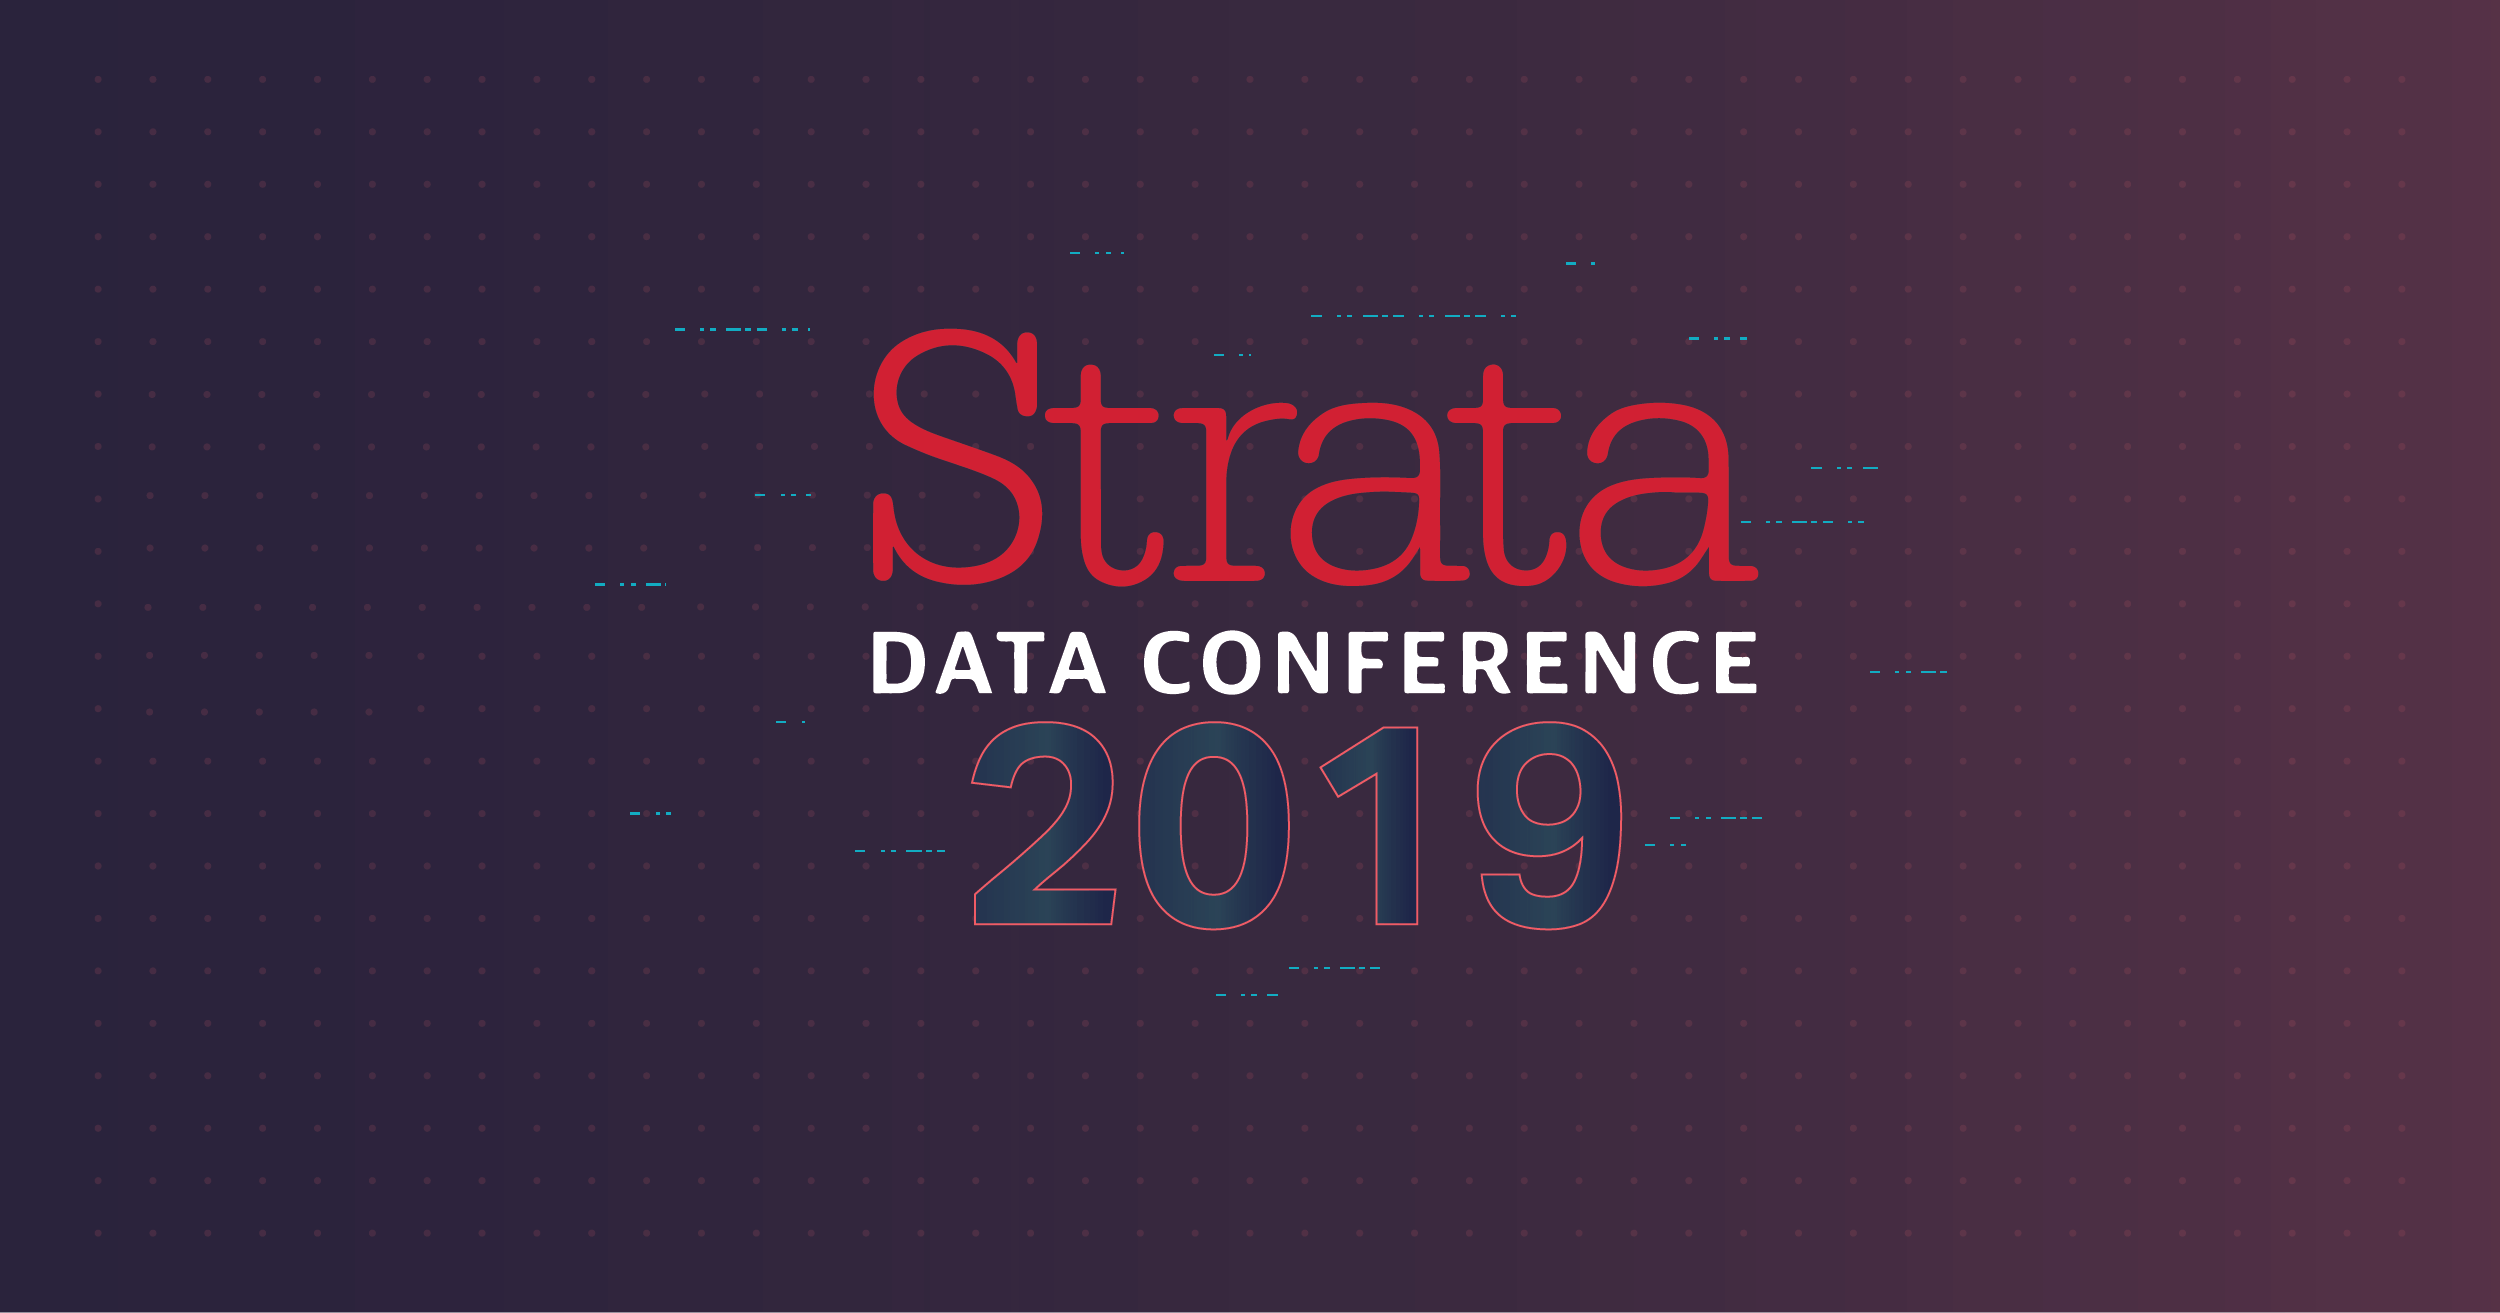 Are You Ready for Strata 2019 in San Francisco?